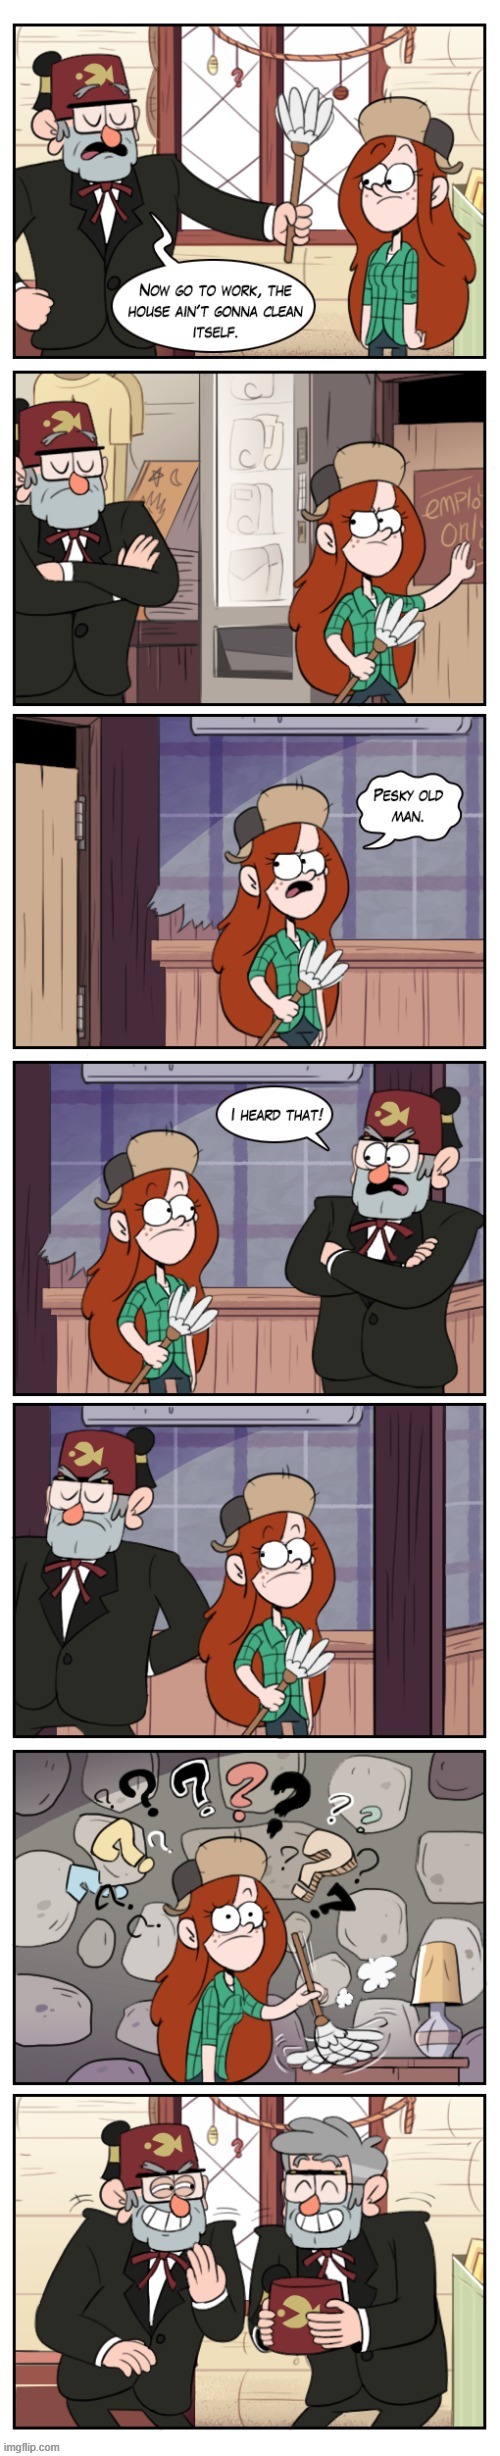 Brothers having fun | image tagged in funny,cute,wholesome,gravity falls | made w/ Imgflip meme maker